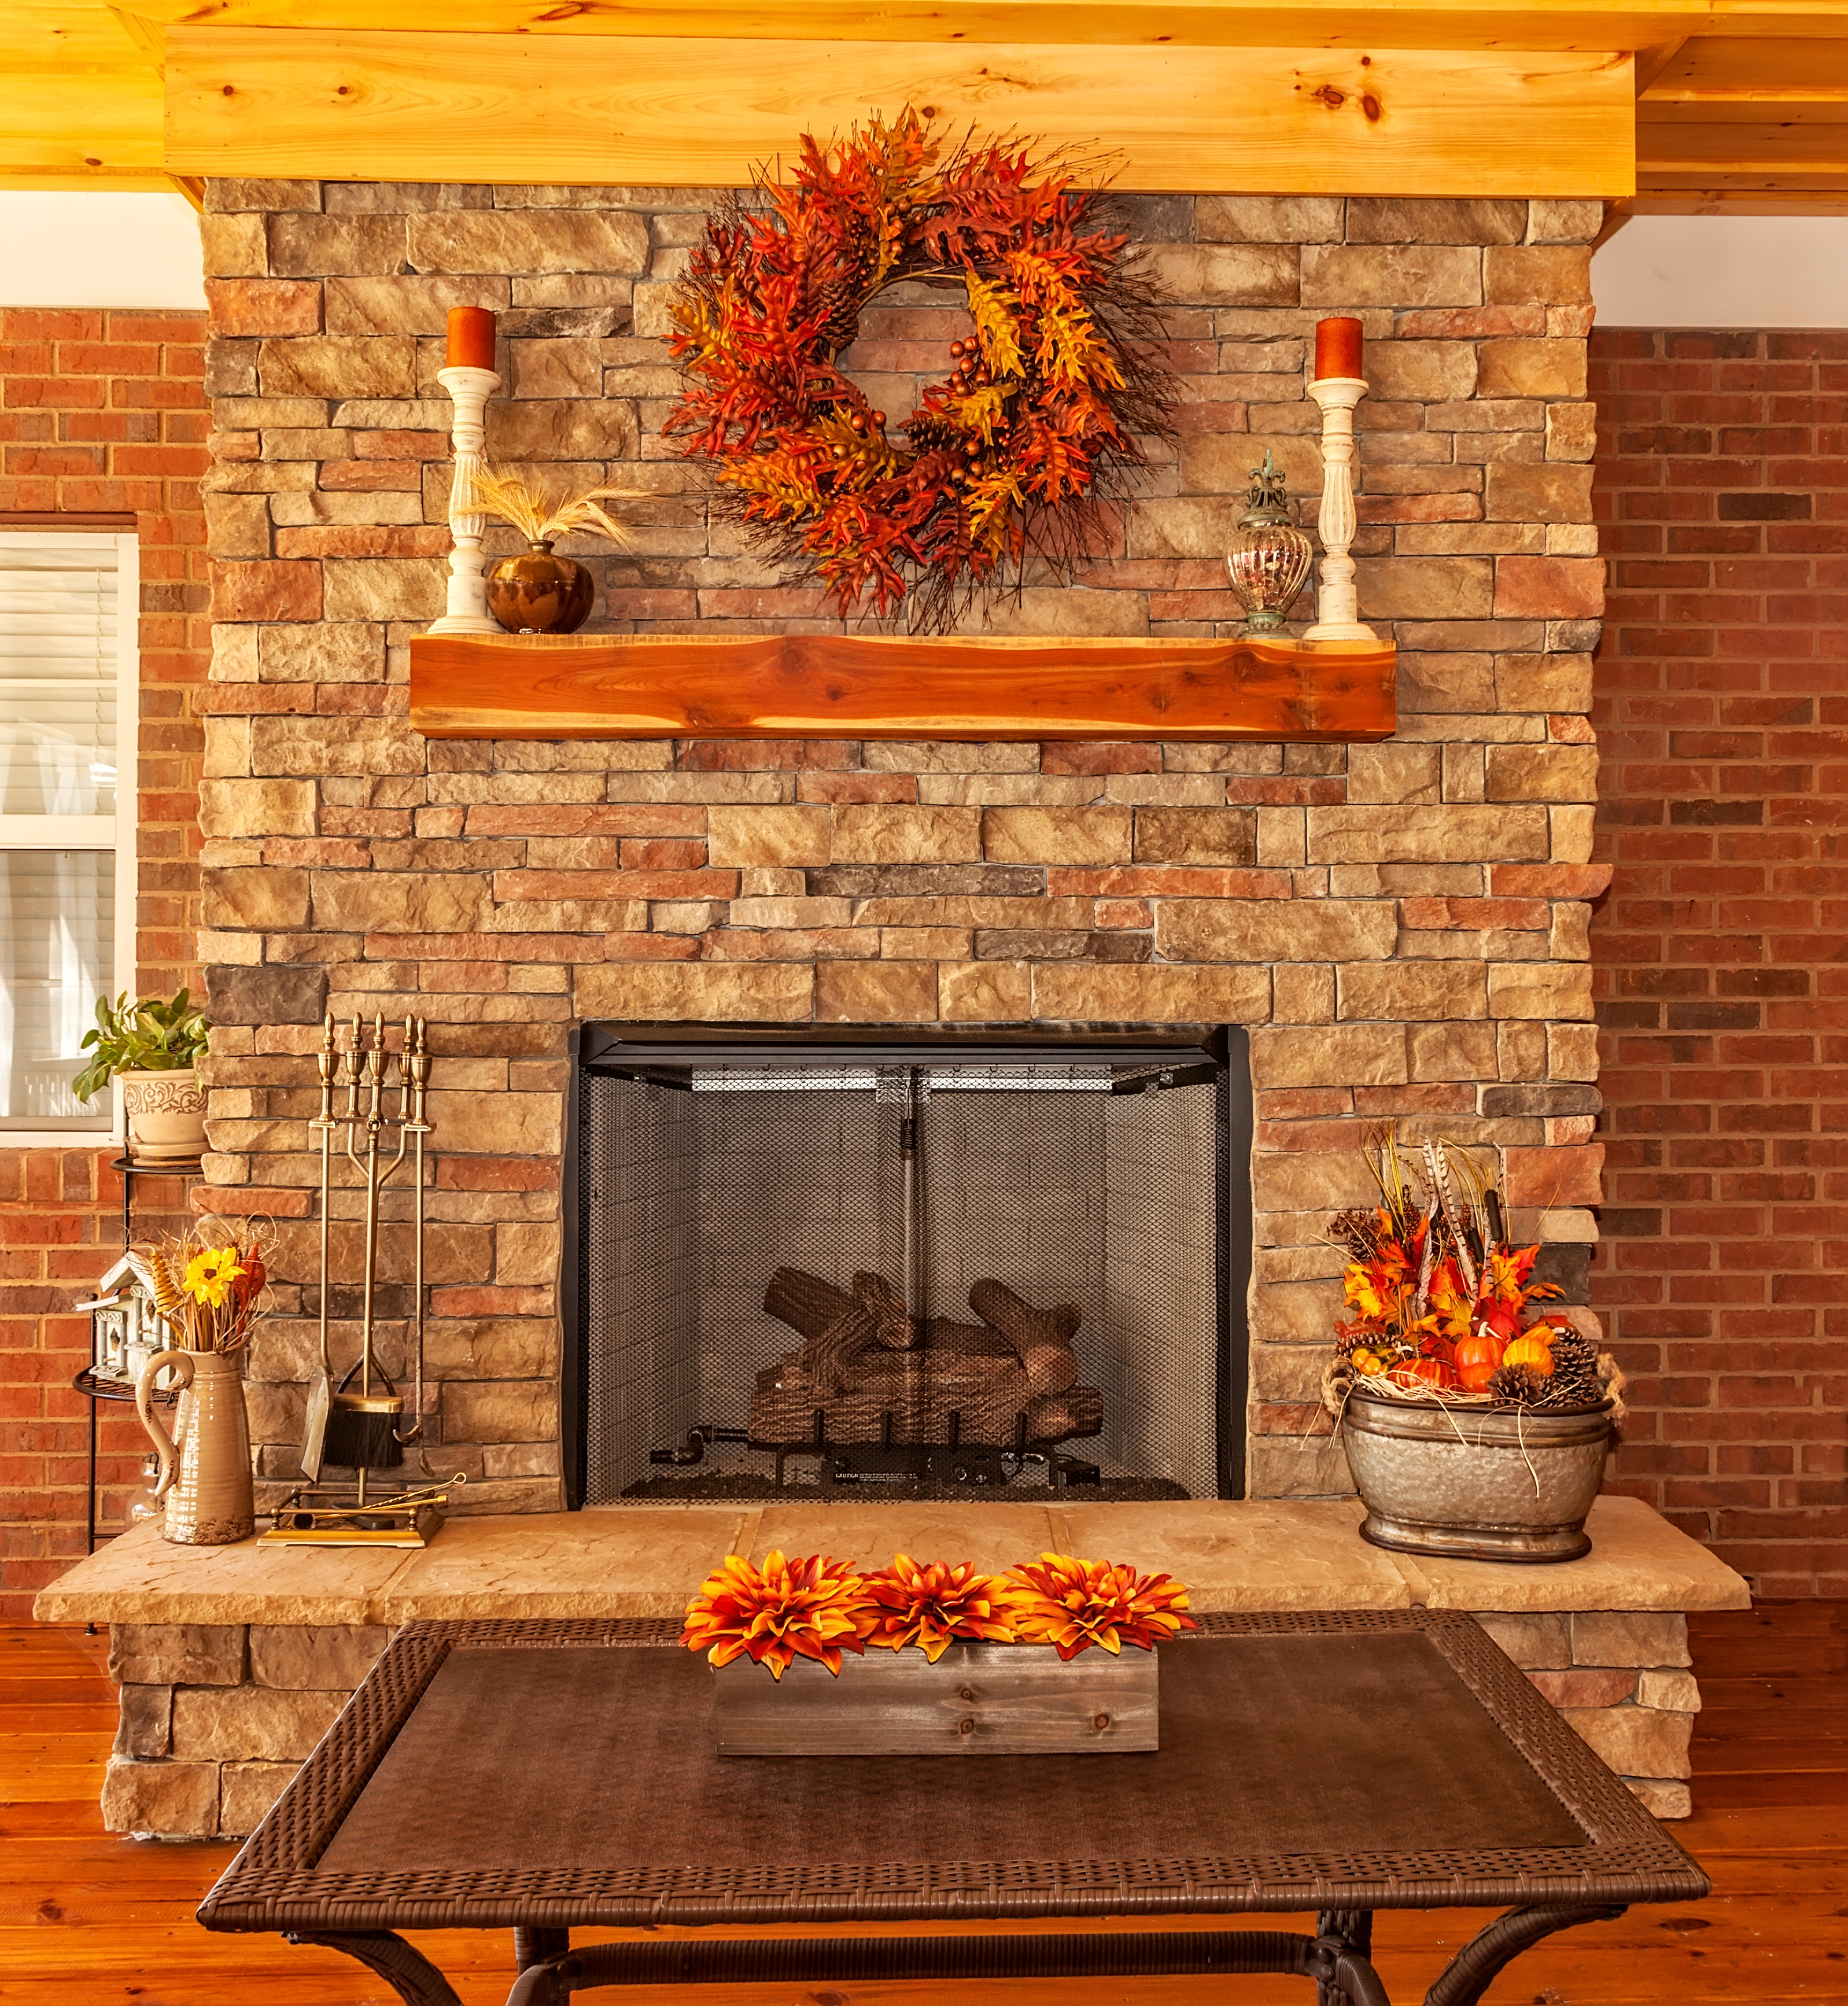 5 Fall Mantel Decorating Ideas That'll Make You Look Like a Pro 8